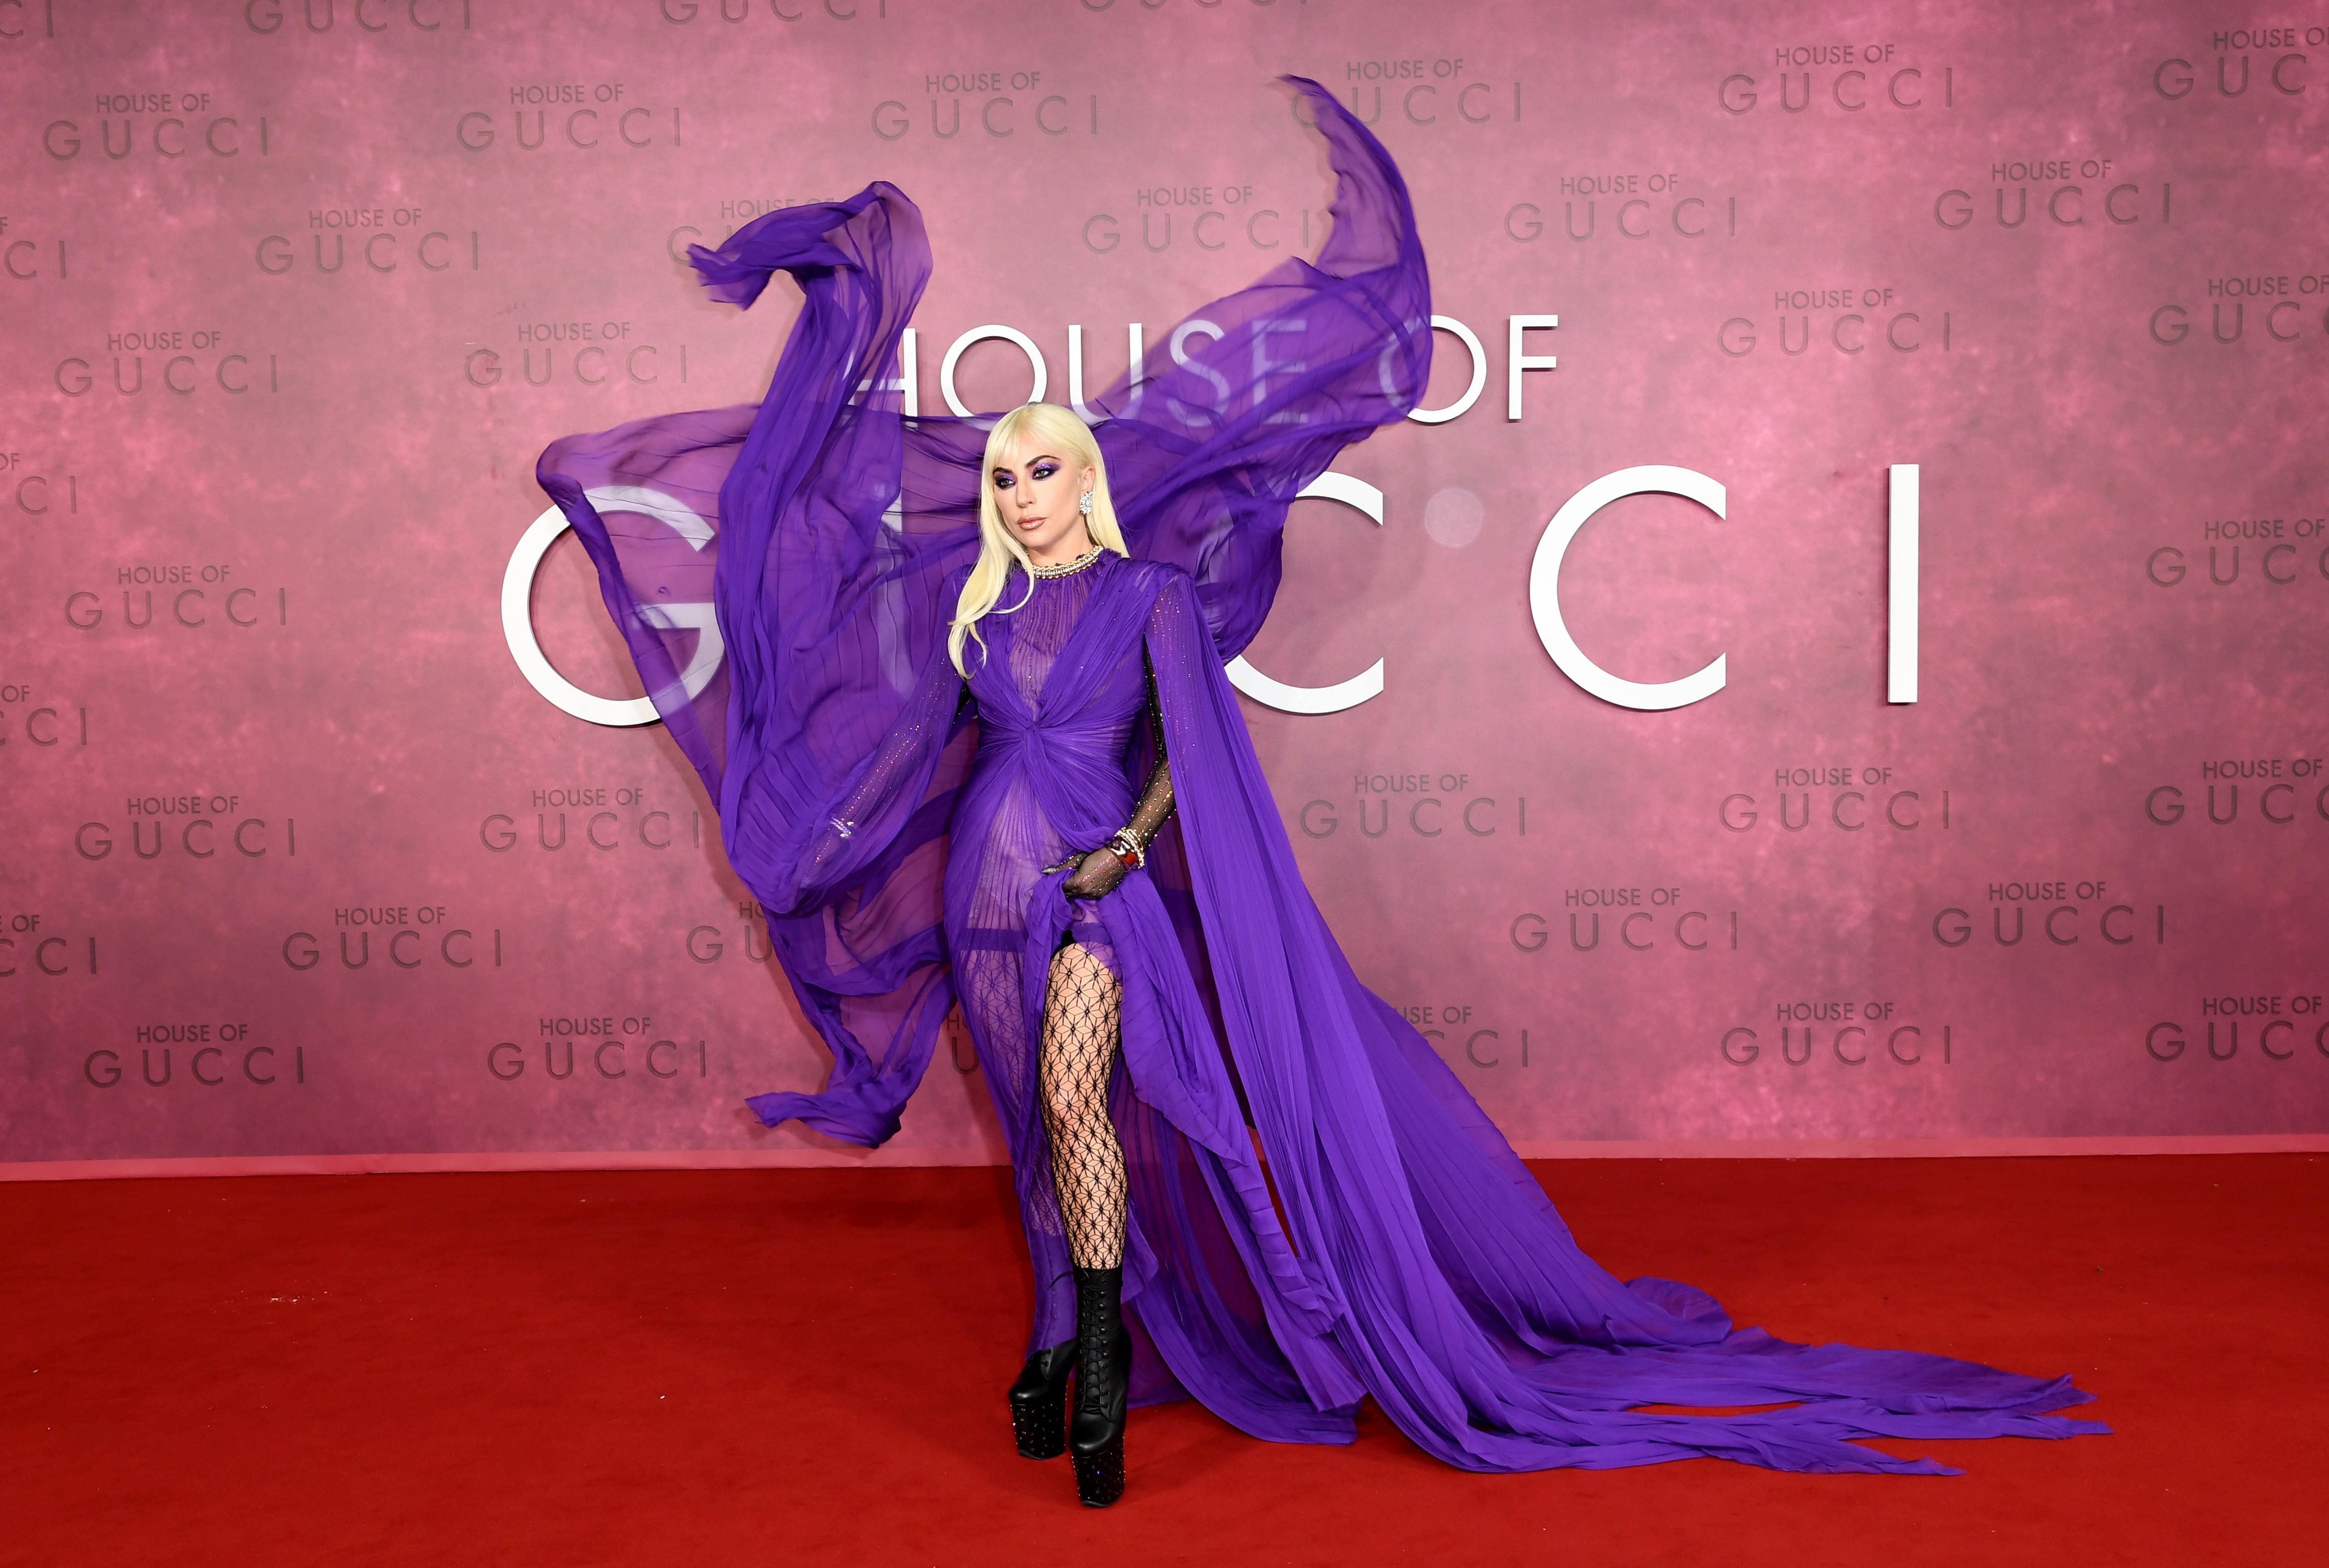 London, England - November 9: Lady Gaga attended the UK premiere "Gucci House" At Odeon Luxe Leicester Square on November 09, 2021 in London, England.  (Photo by Gareth Cattermole/Getty Images for Metro-Goldwyn-Mayer Studios and Universal Pictures) (Foto: Gareth Cattermole/Getty Images f)